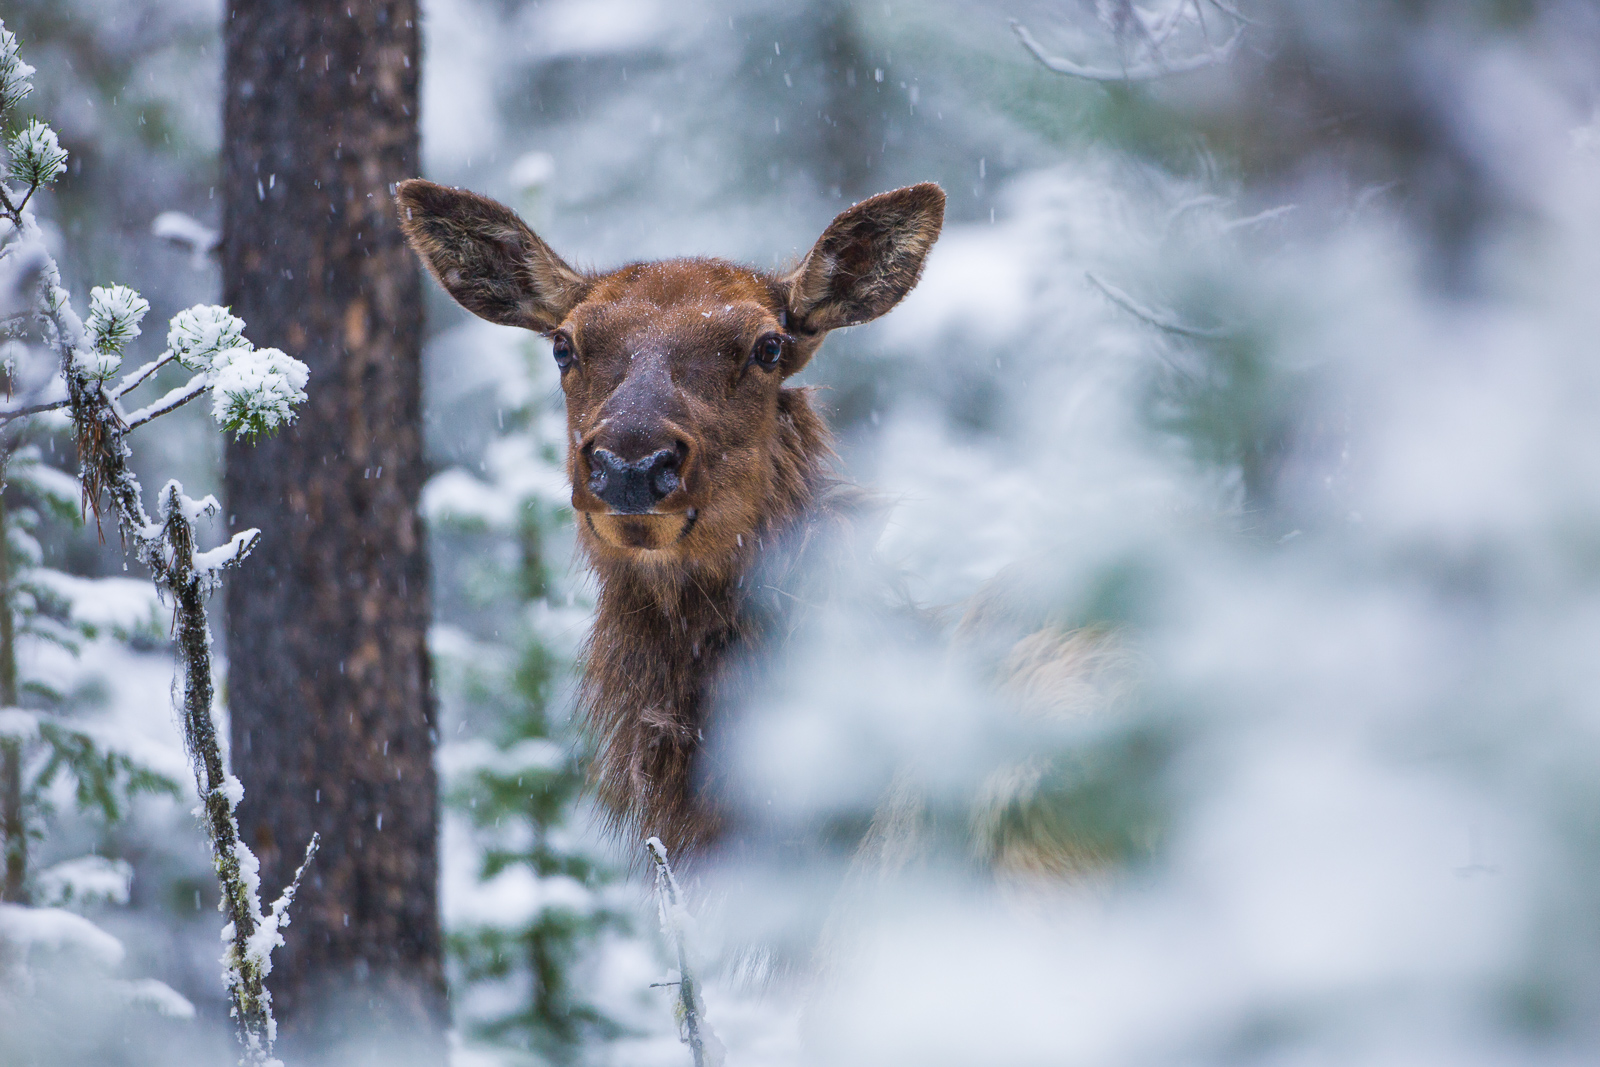 Elk takes a peak out of a snowy shelter in the Northeast part of Yellowstone National Park.